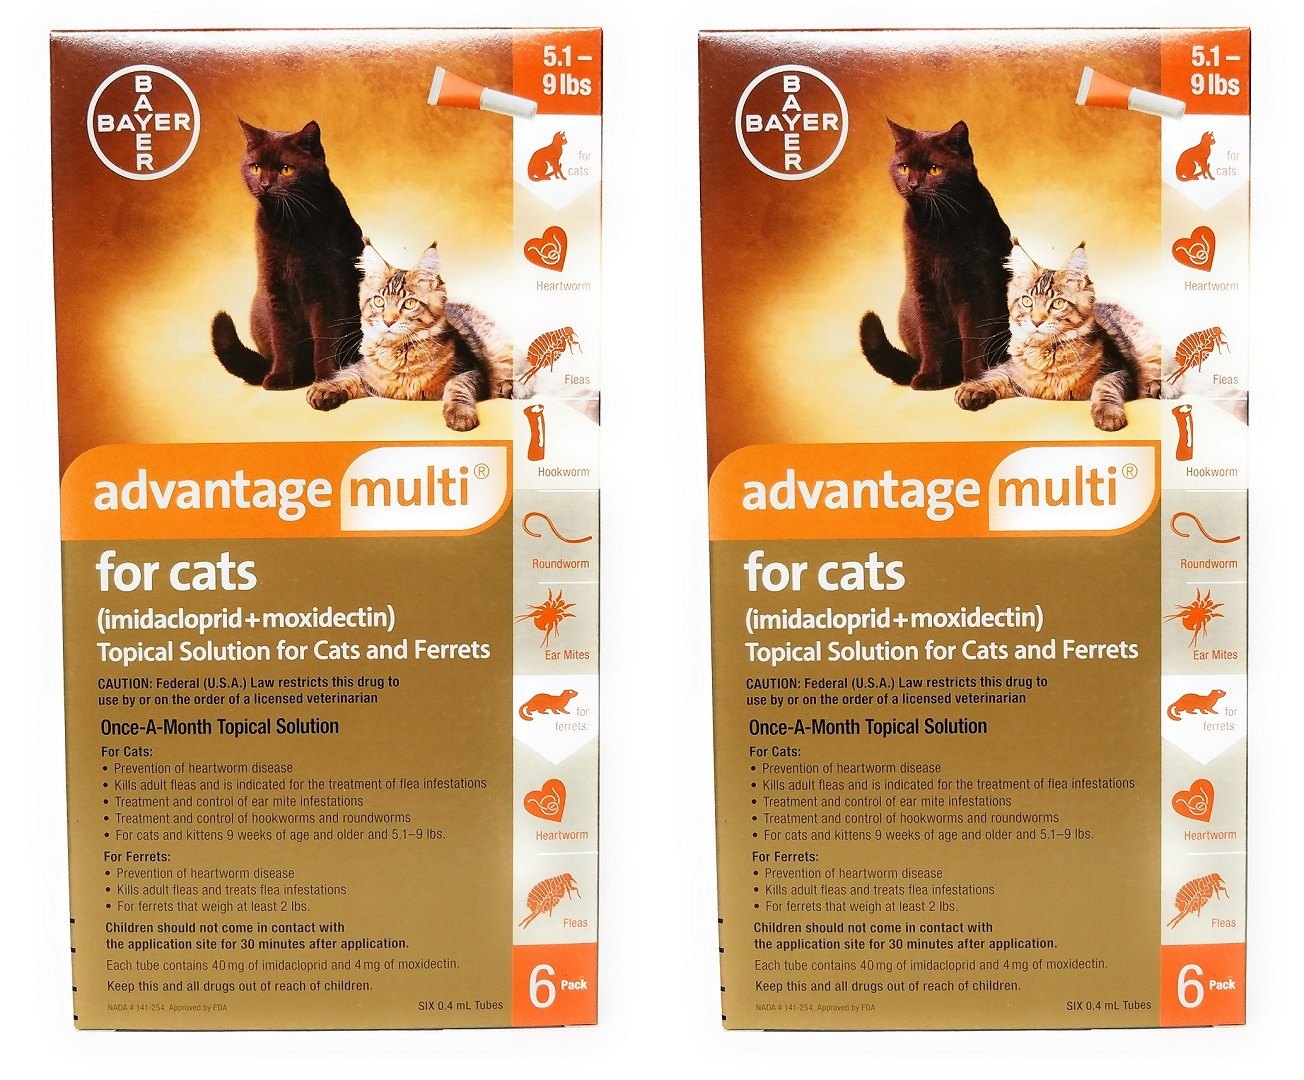 vet-approved-rx-advantage-multi-cat-5-9-lbs-12-doses